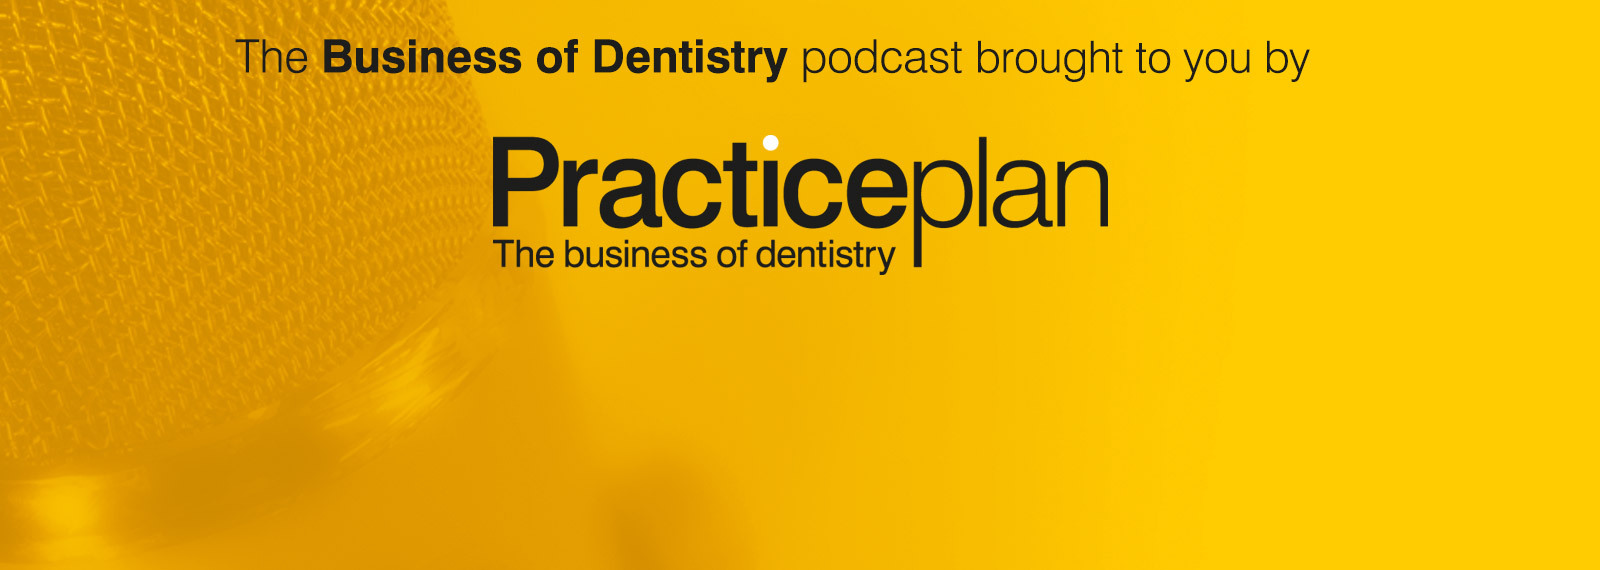 The Business of Dentistry Podcast